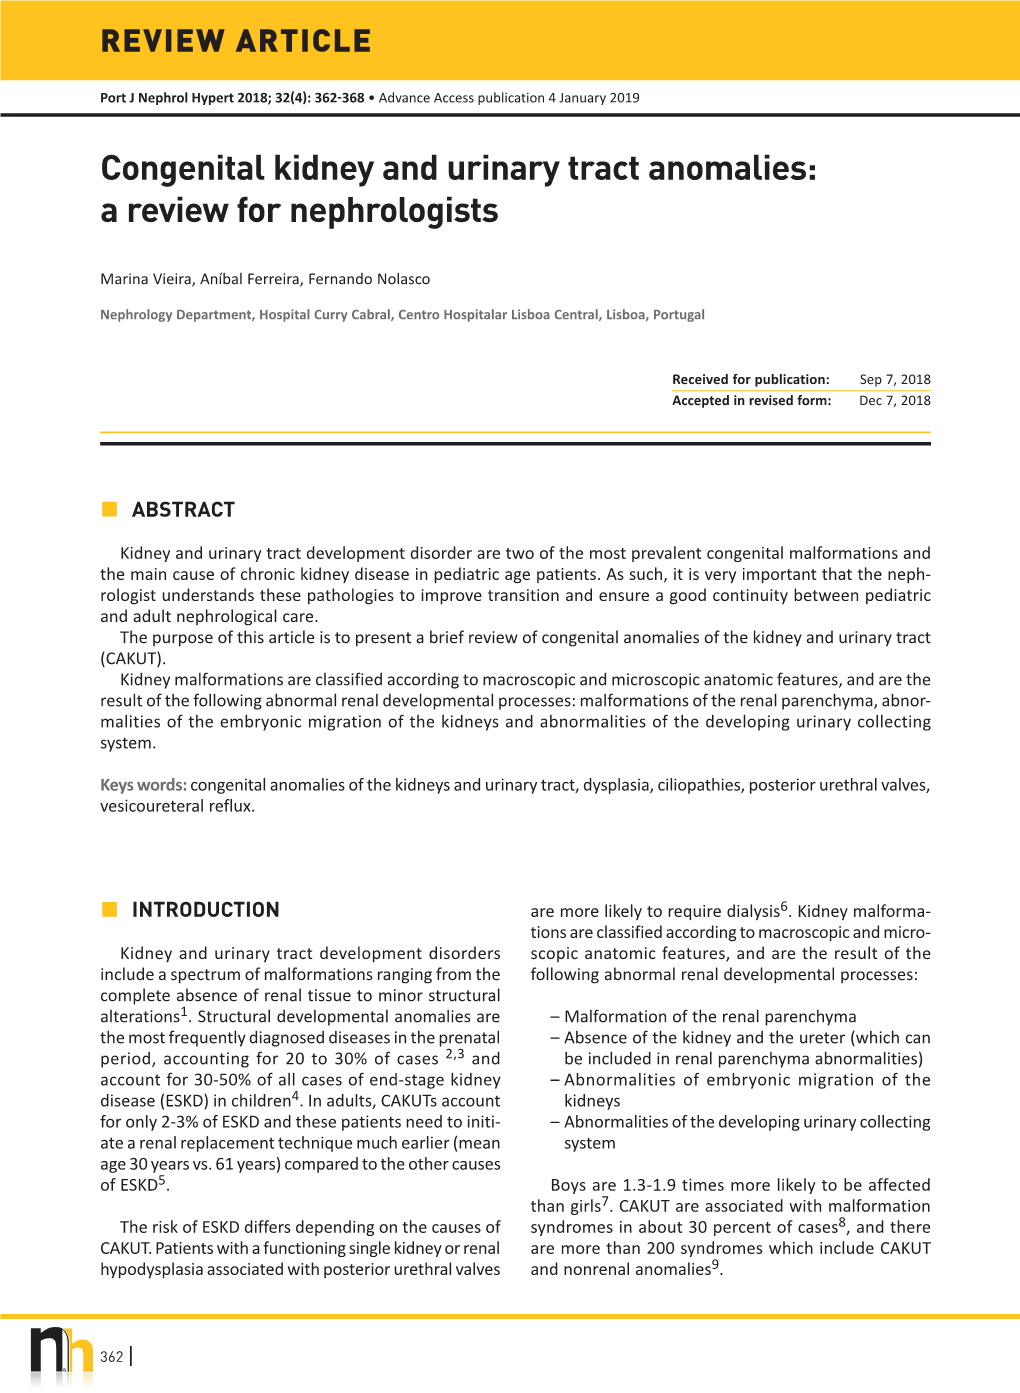 Congenital Kidney and Urinary Tract Anomalies: a Review for Nephrologists